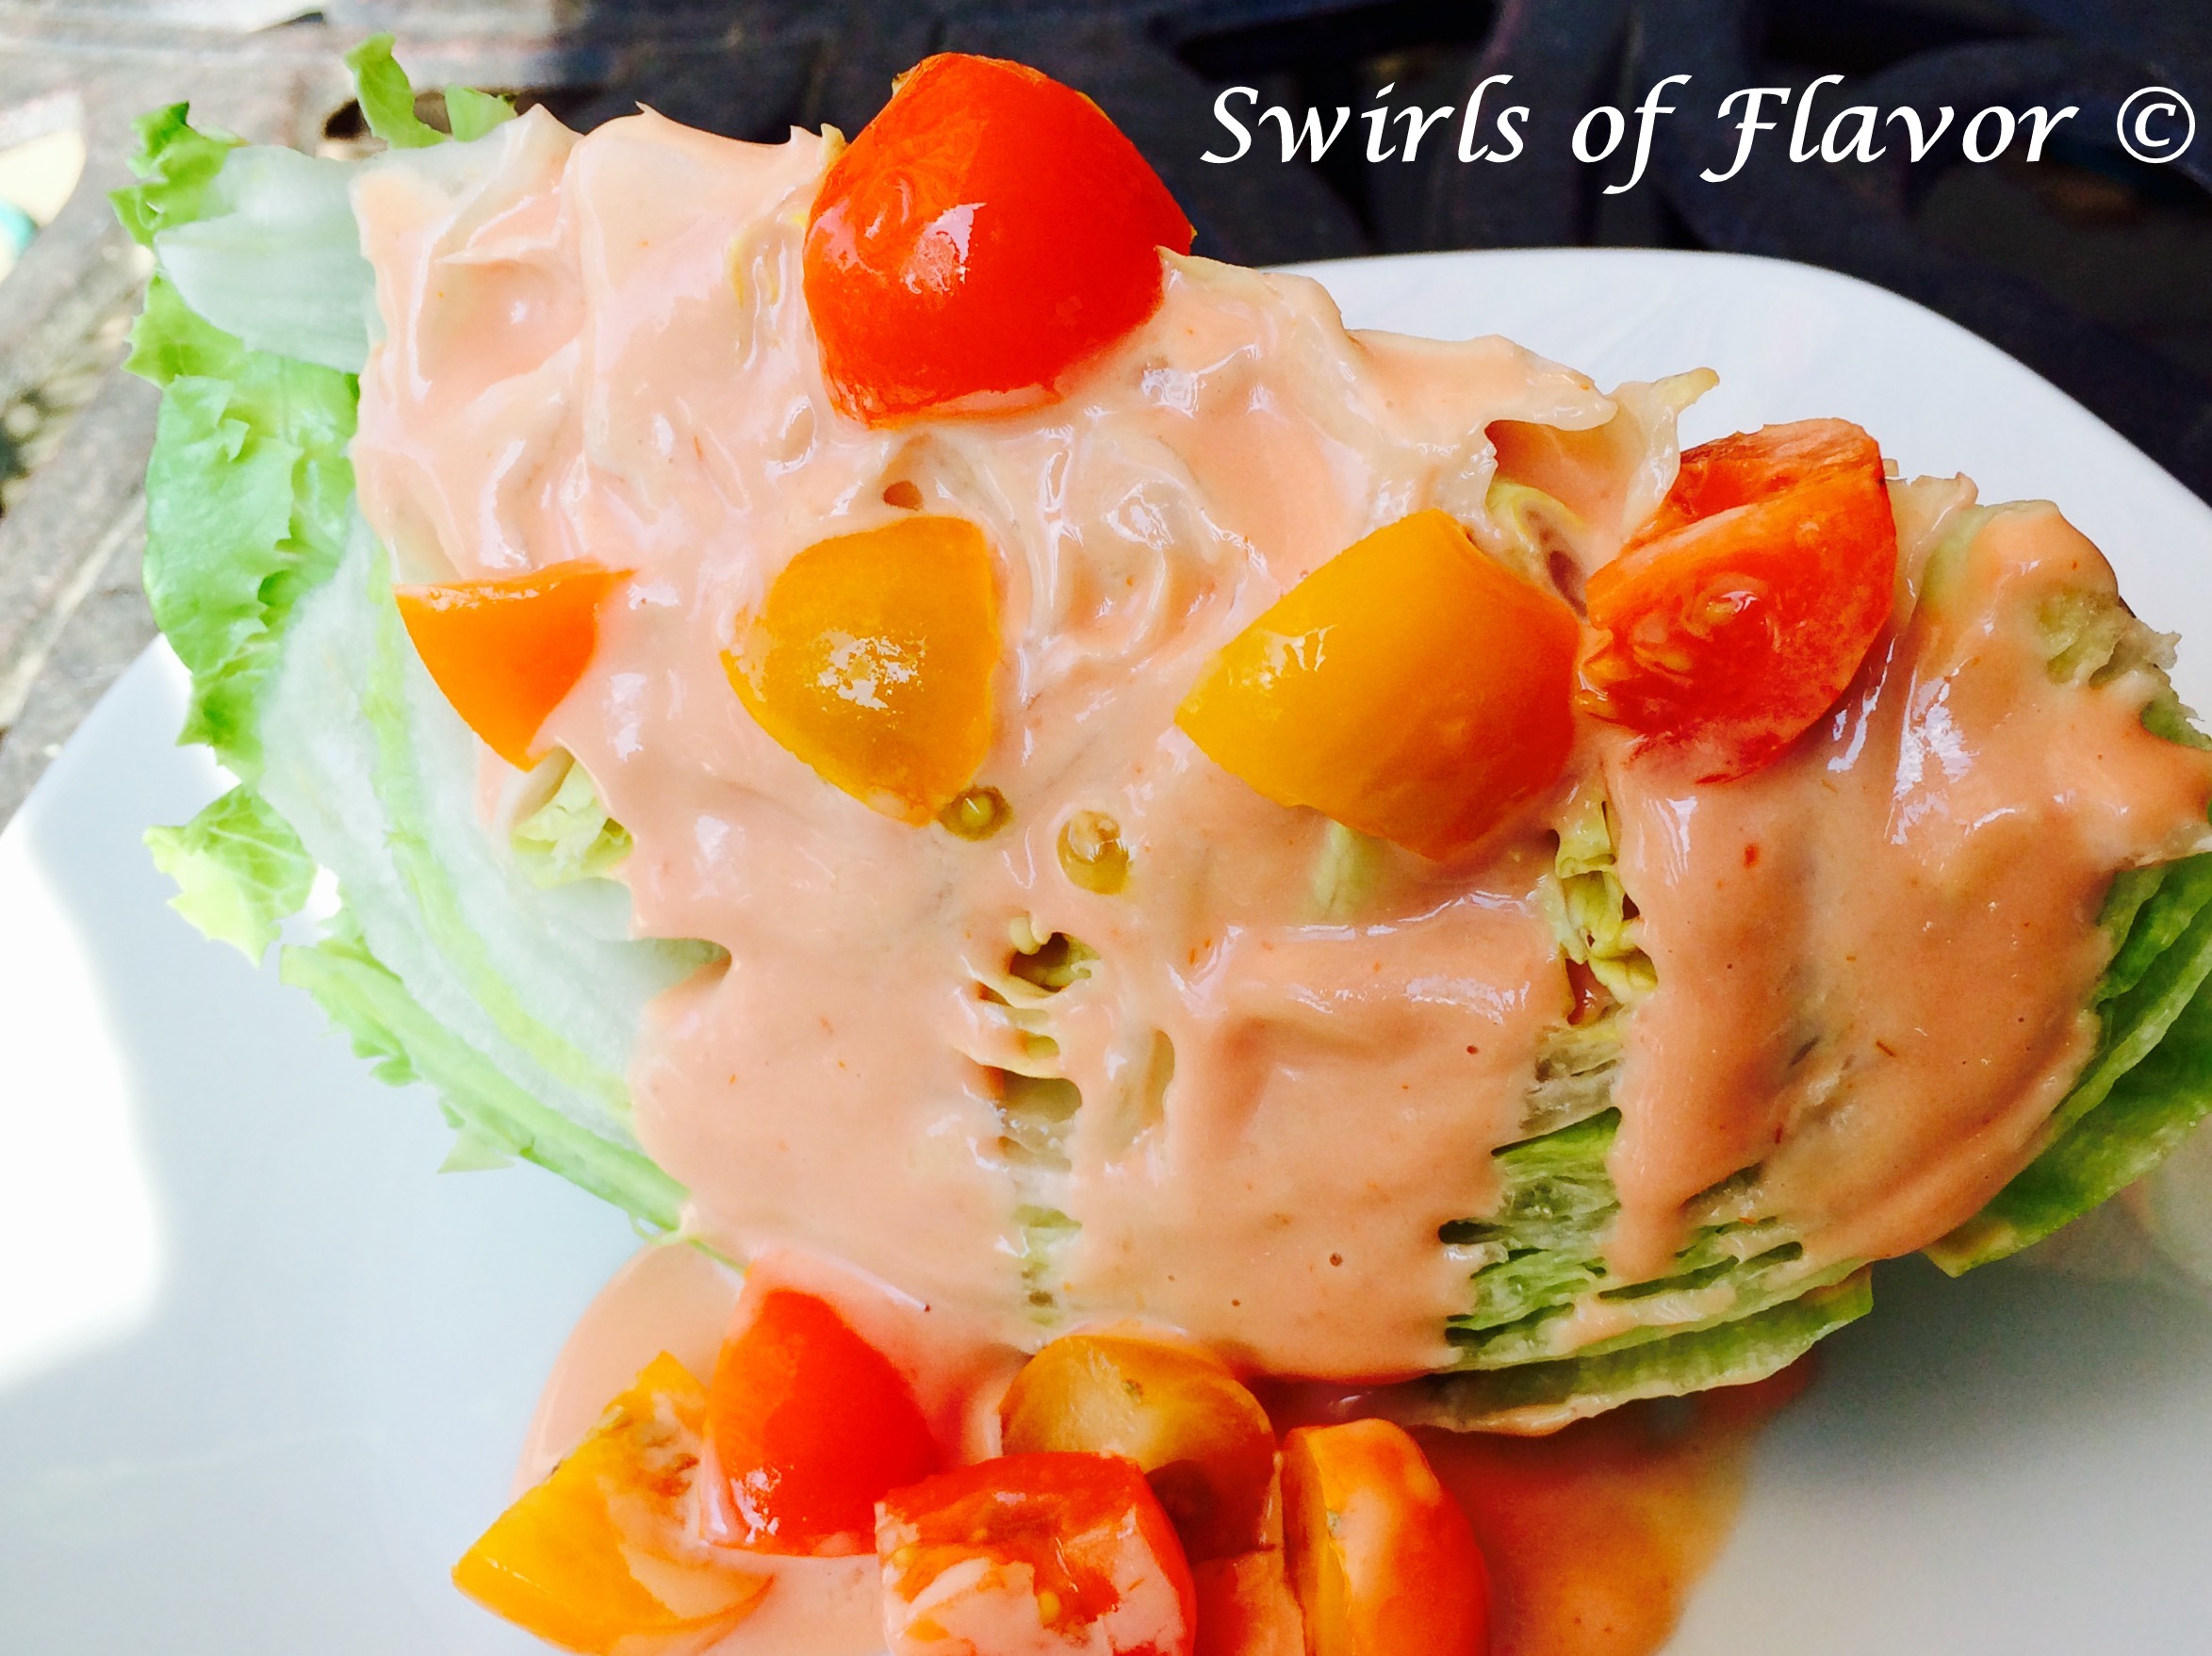 Iceberg Wedge Salad with creamy dressing and tomatoes